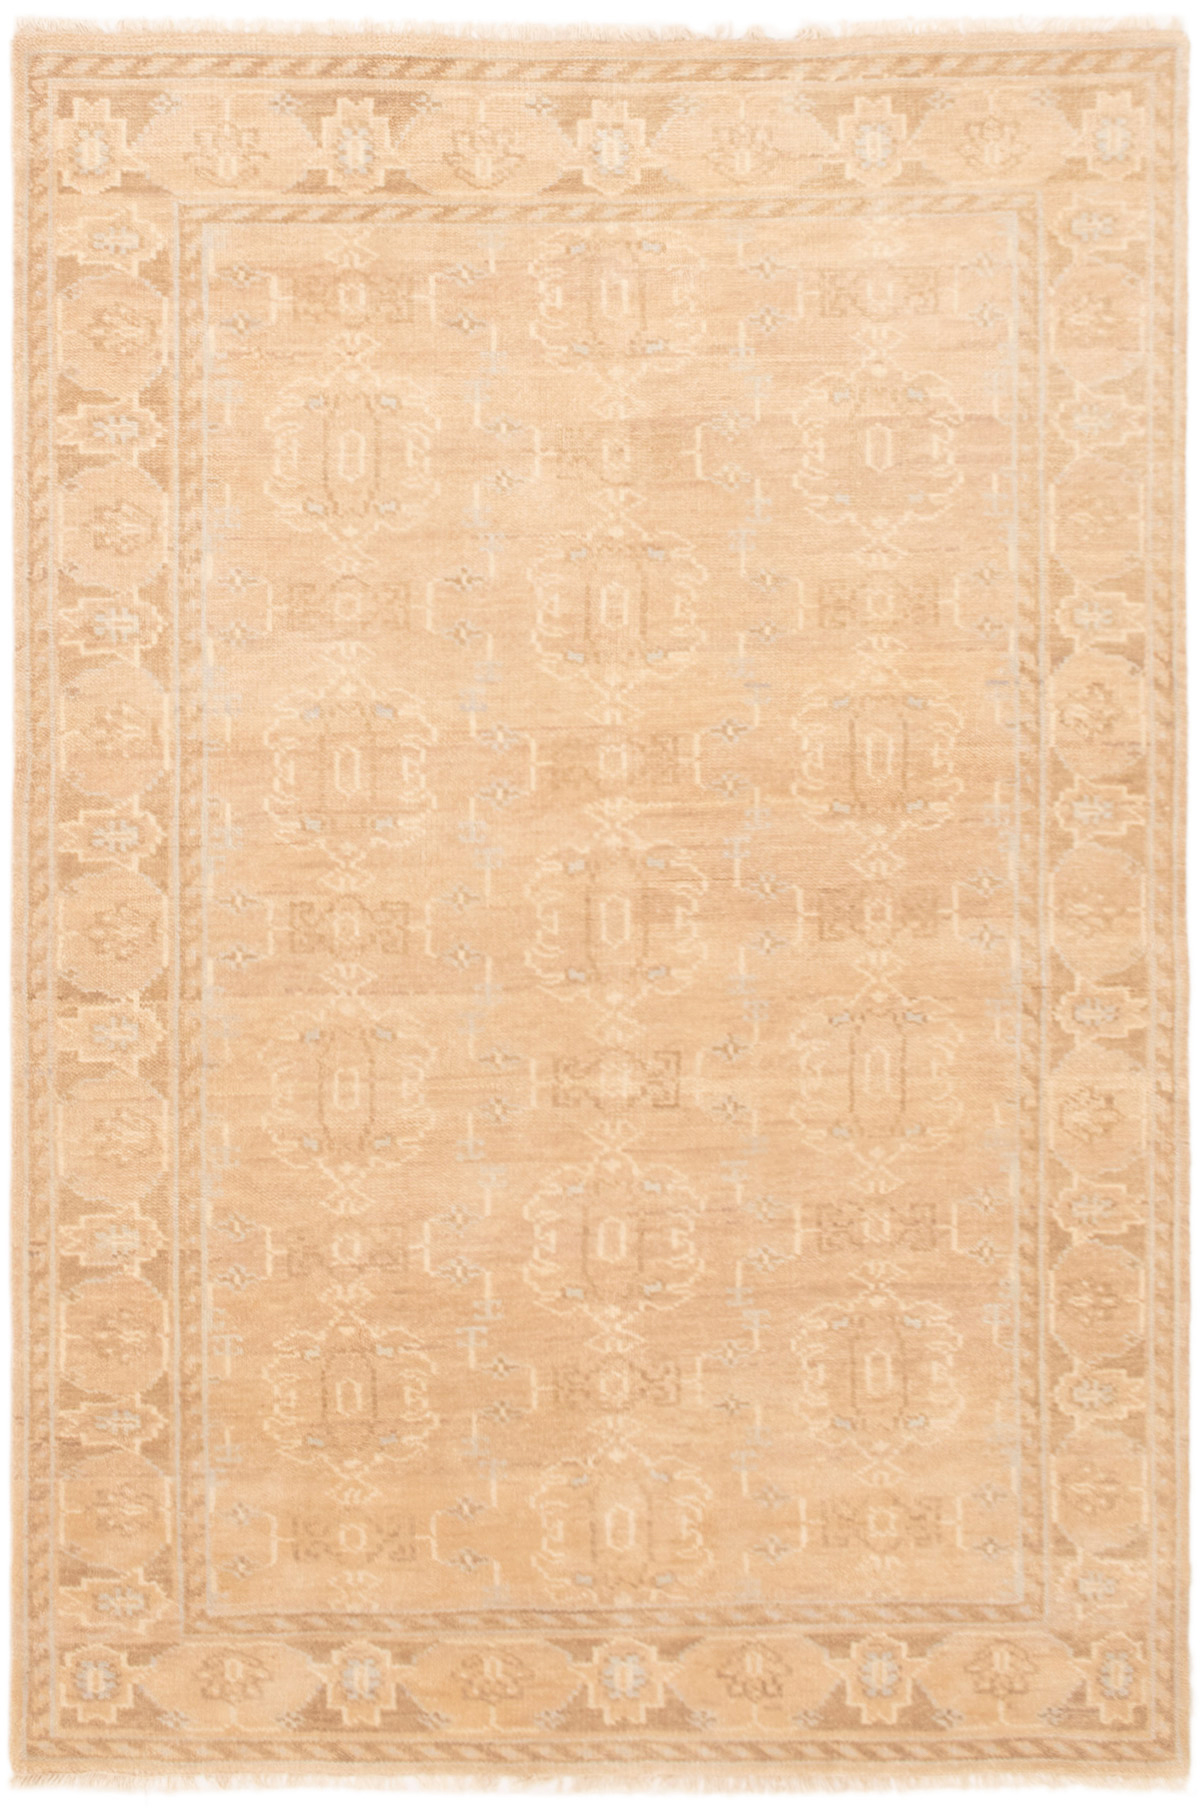 Hand-knotted Finest Ushak Tan Wool Rug 5'2" x 7'8" Size: 5'2" x 7'8"  